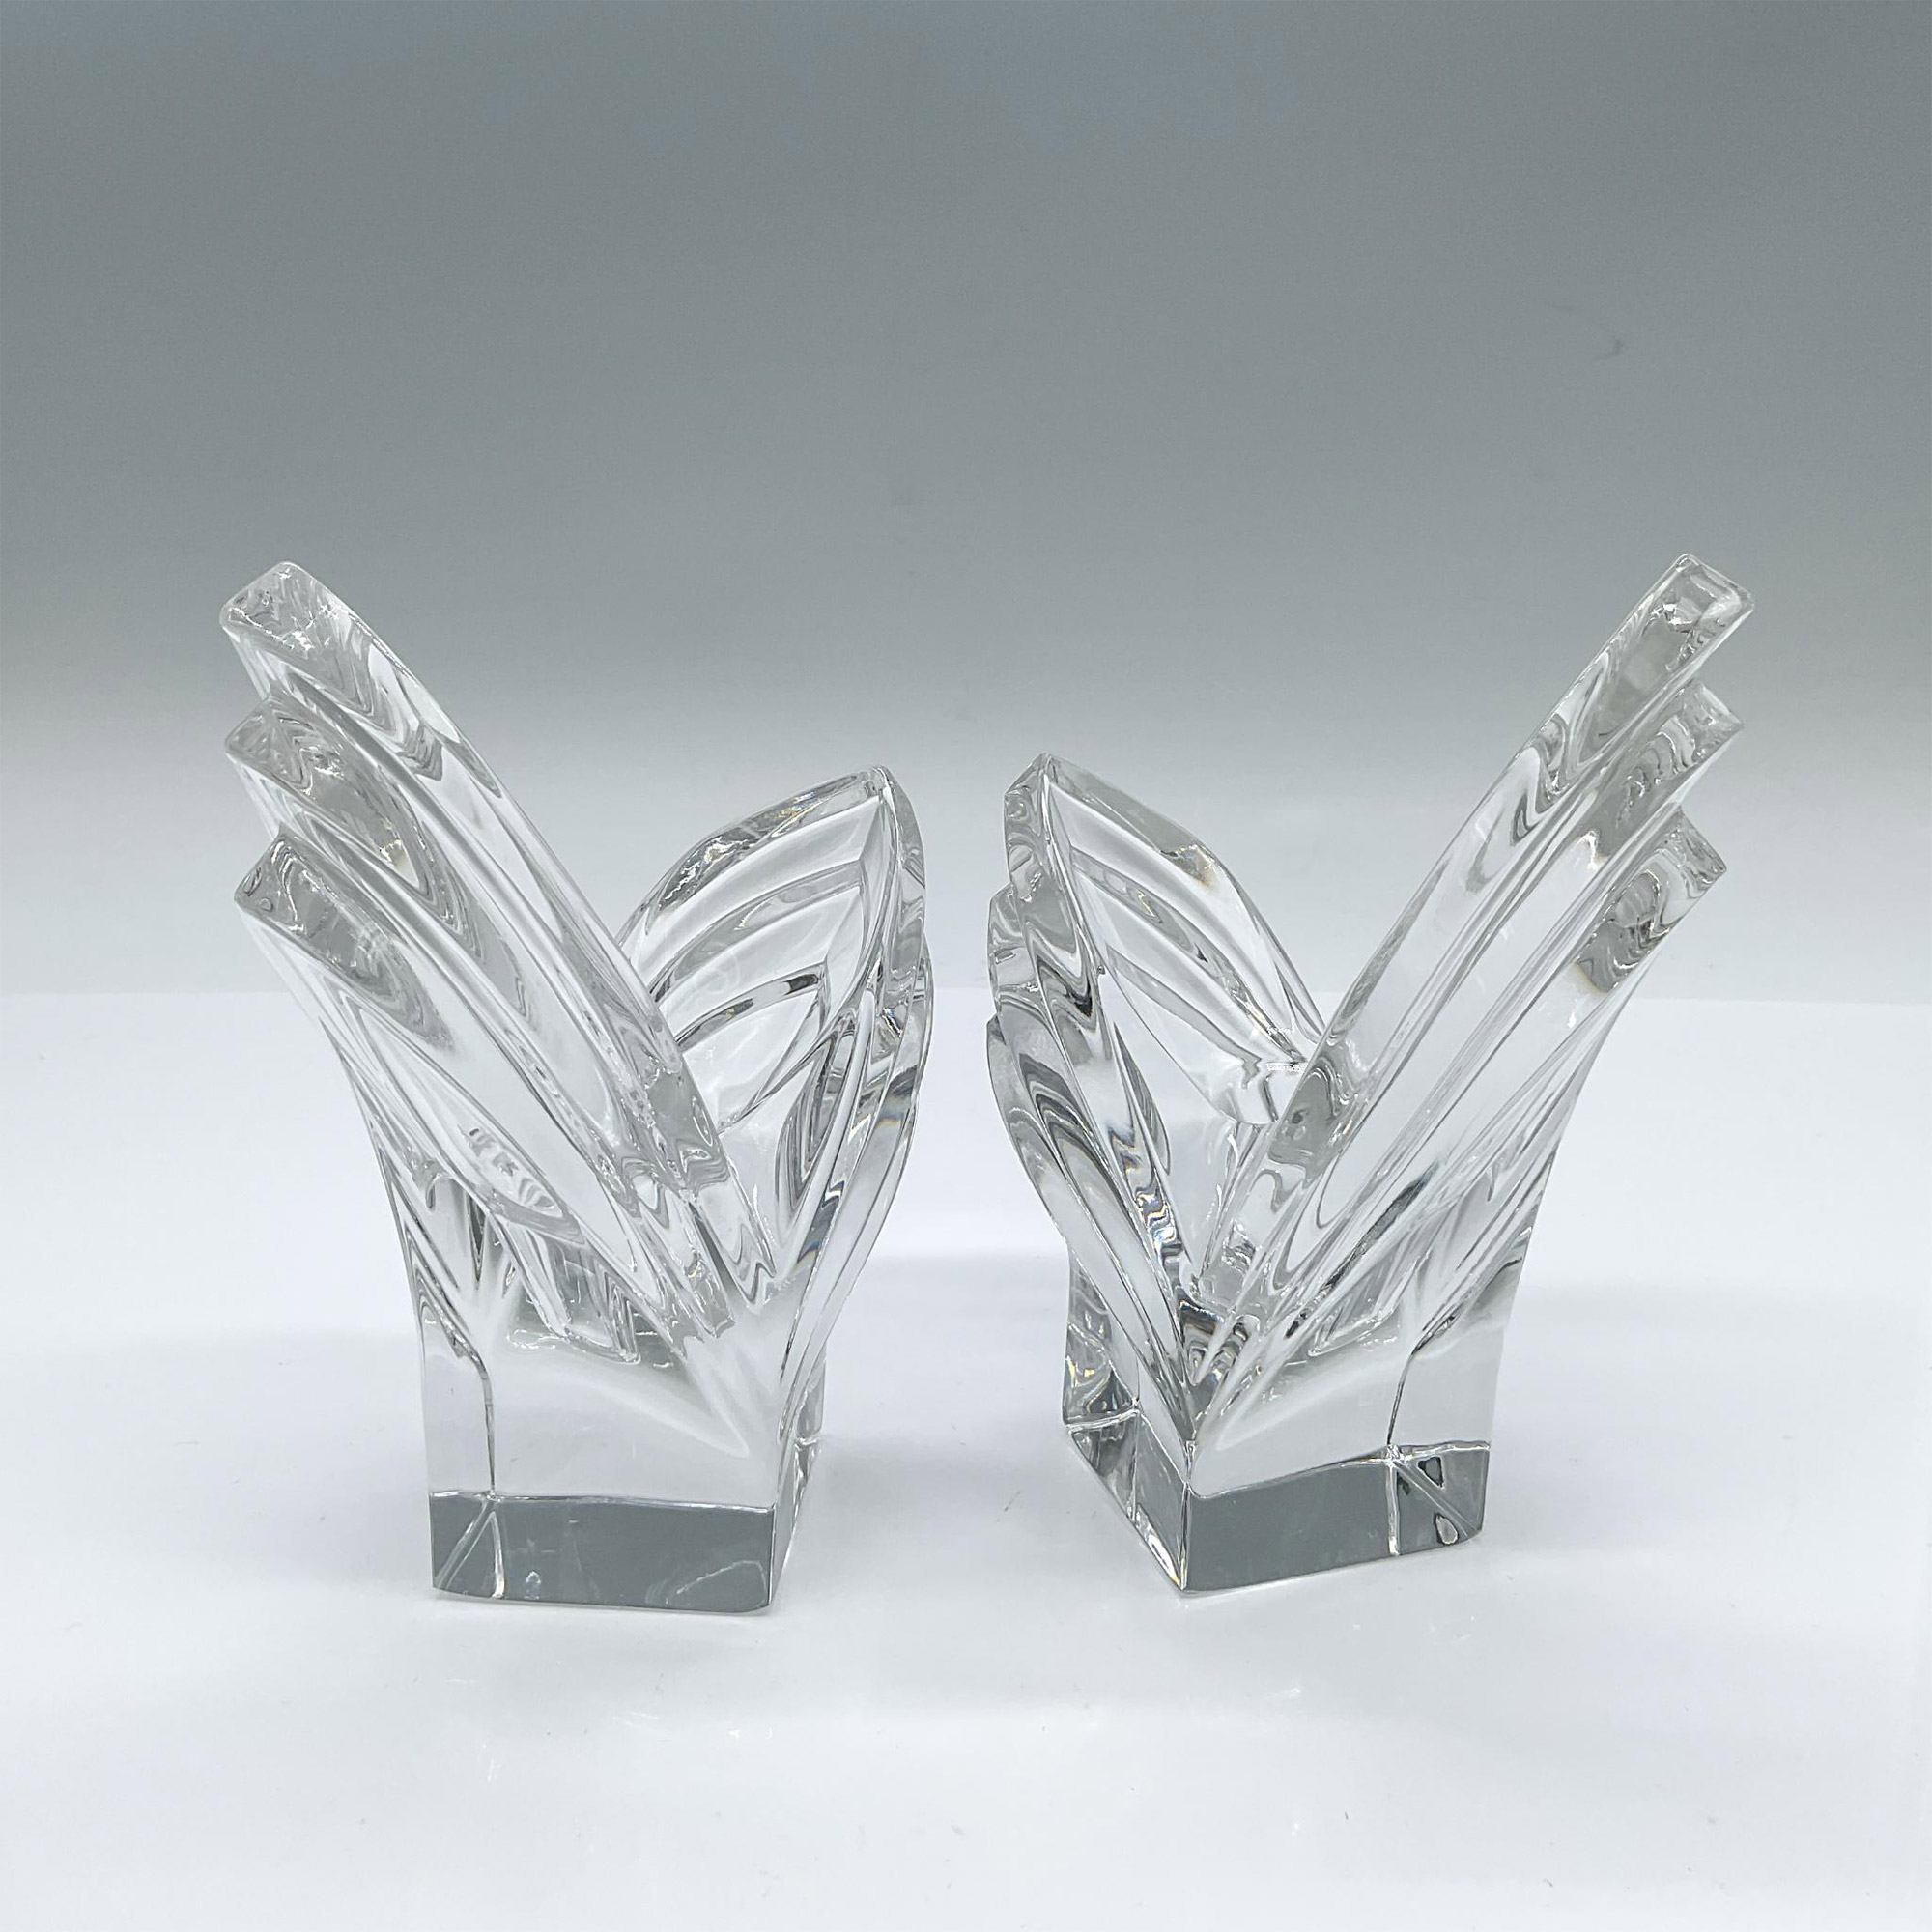 Pair of Mikasa Crystal Candlestick Holders, Deco - Image 2 of 4